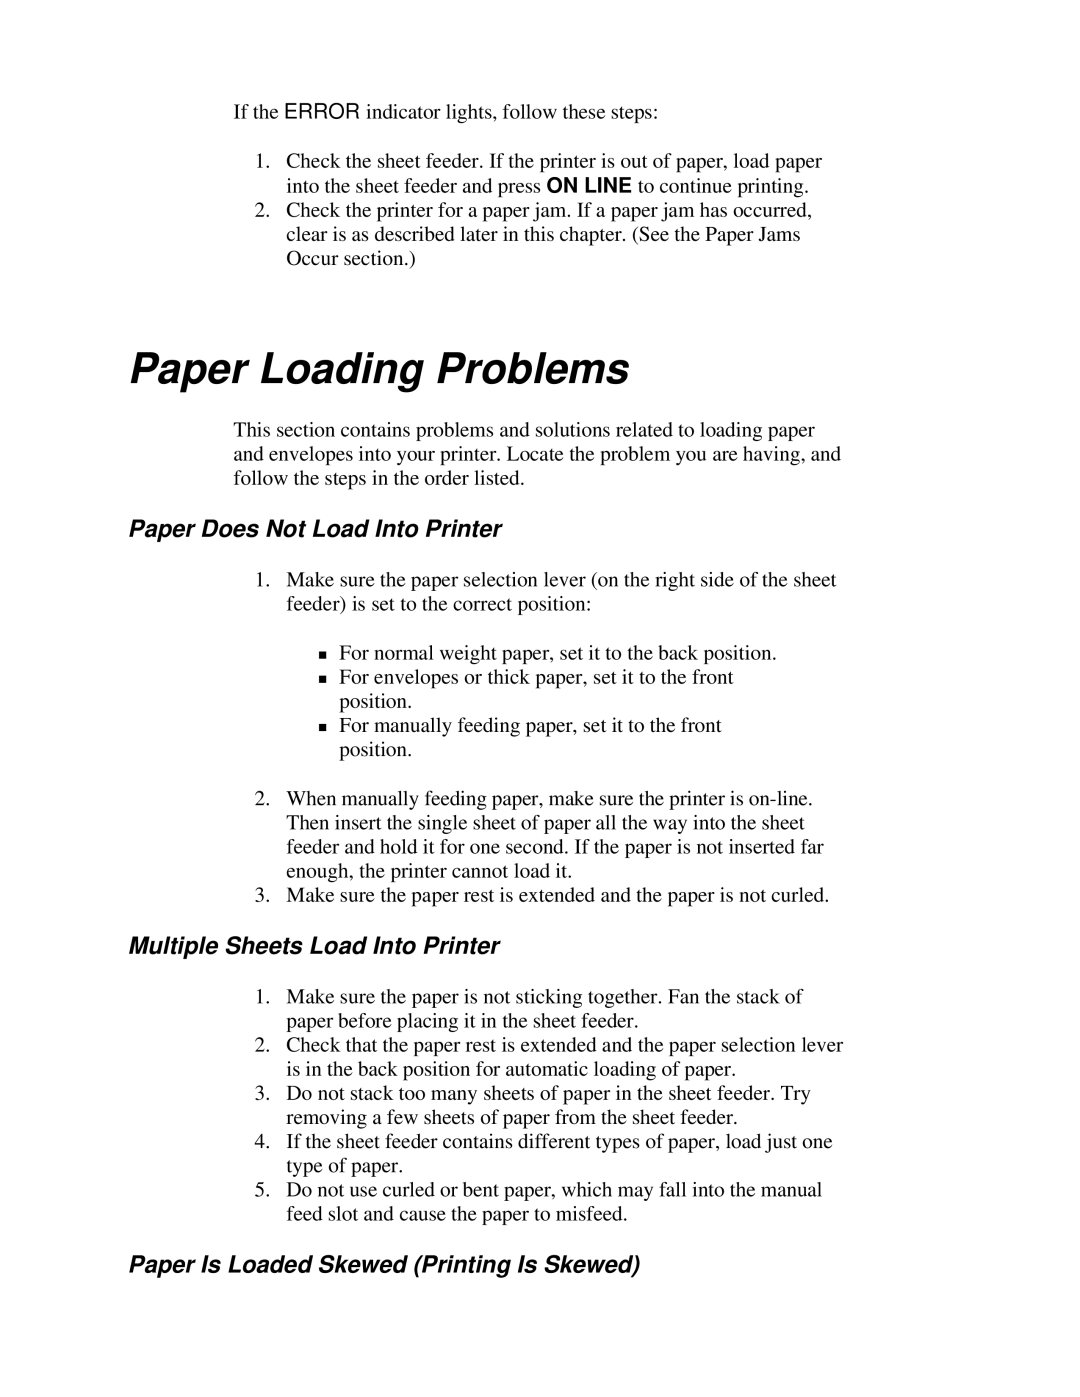 Canon BJ-230 user manual Paper Loading Problems, Paper Does Not Load Into Printer, Multiple Sheets Load Into Printer 